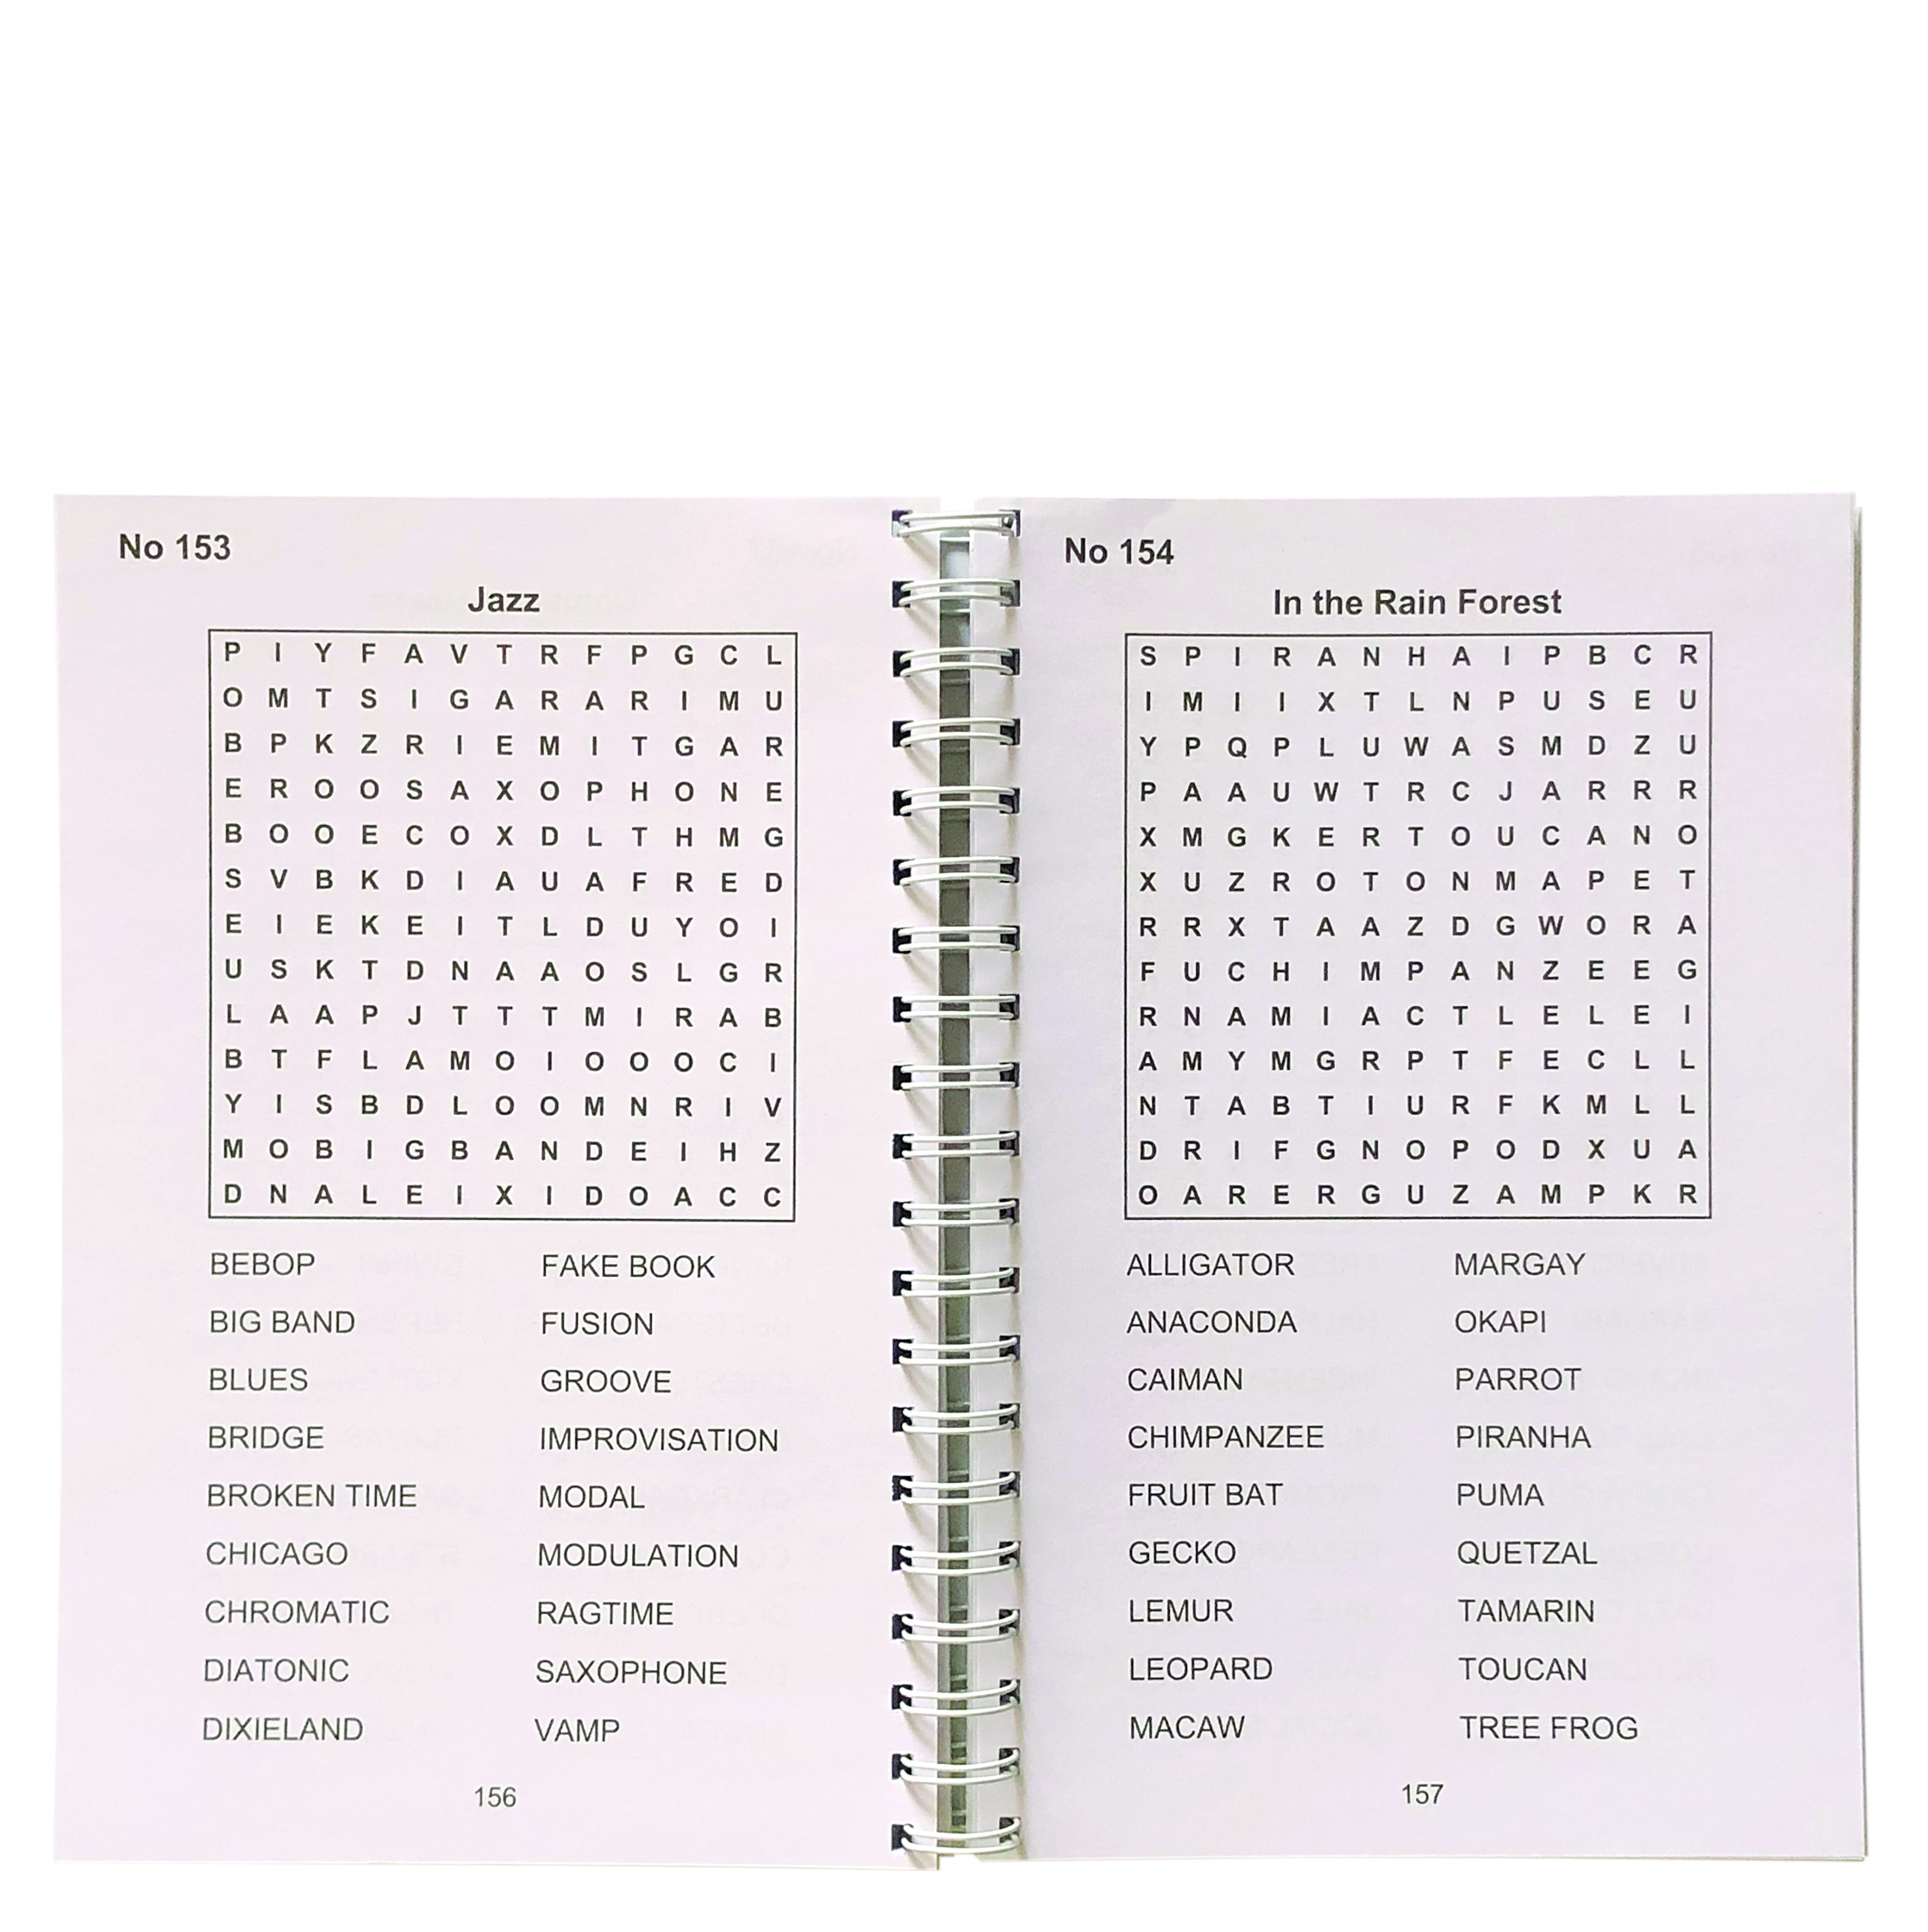 Large Print Word Search Puzzles Teal